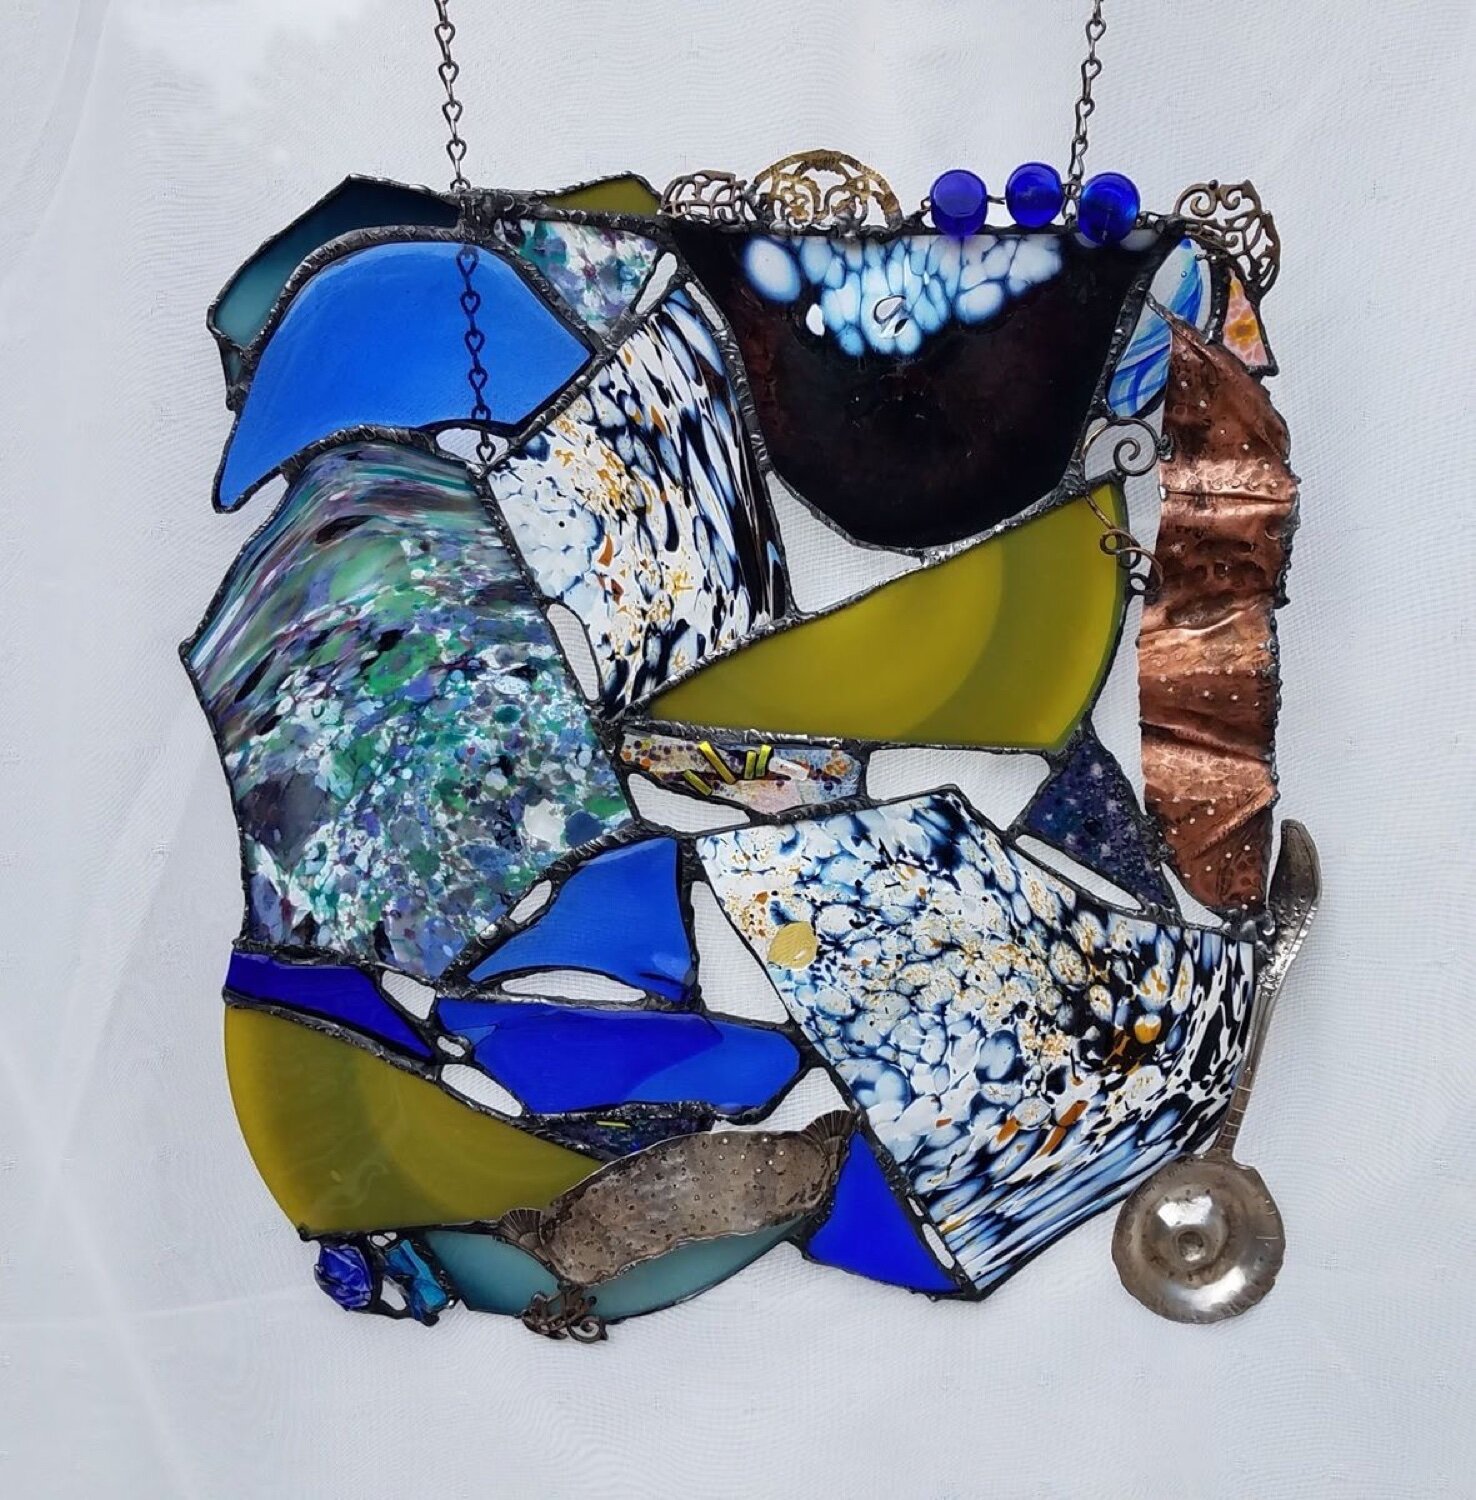 HIGH WINDS ~ 17" X 16" Hand-forged recycled metals and repurposed glass shards (SOLD)